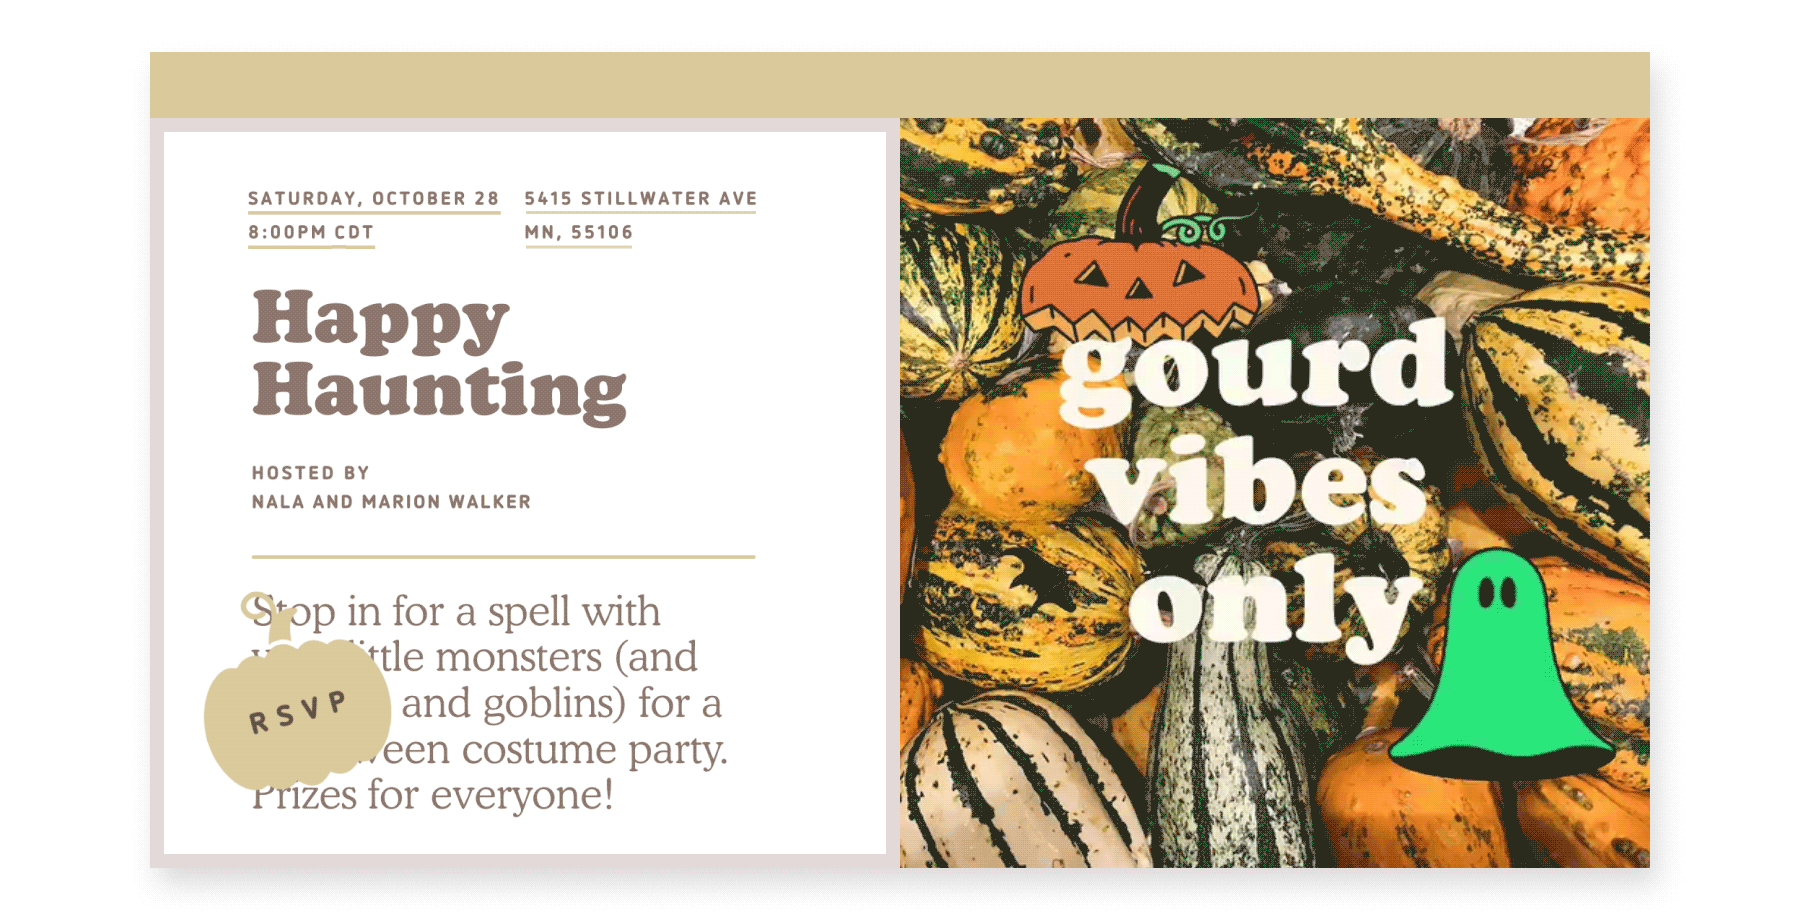 An online invite for “Happy haunting” with a photo of several autumn gourds on the right and animated jack-o-lantern, bat wings, ang a green ghost with the words “gourd vibes only.”